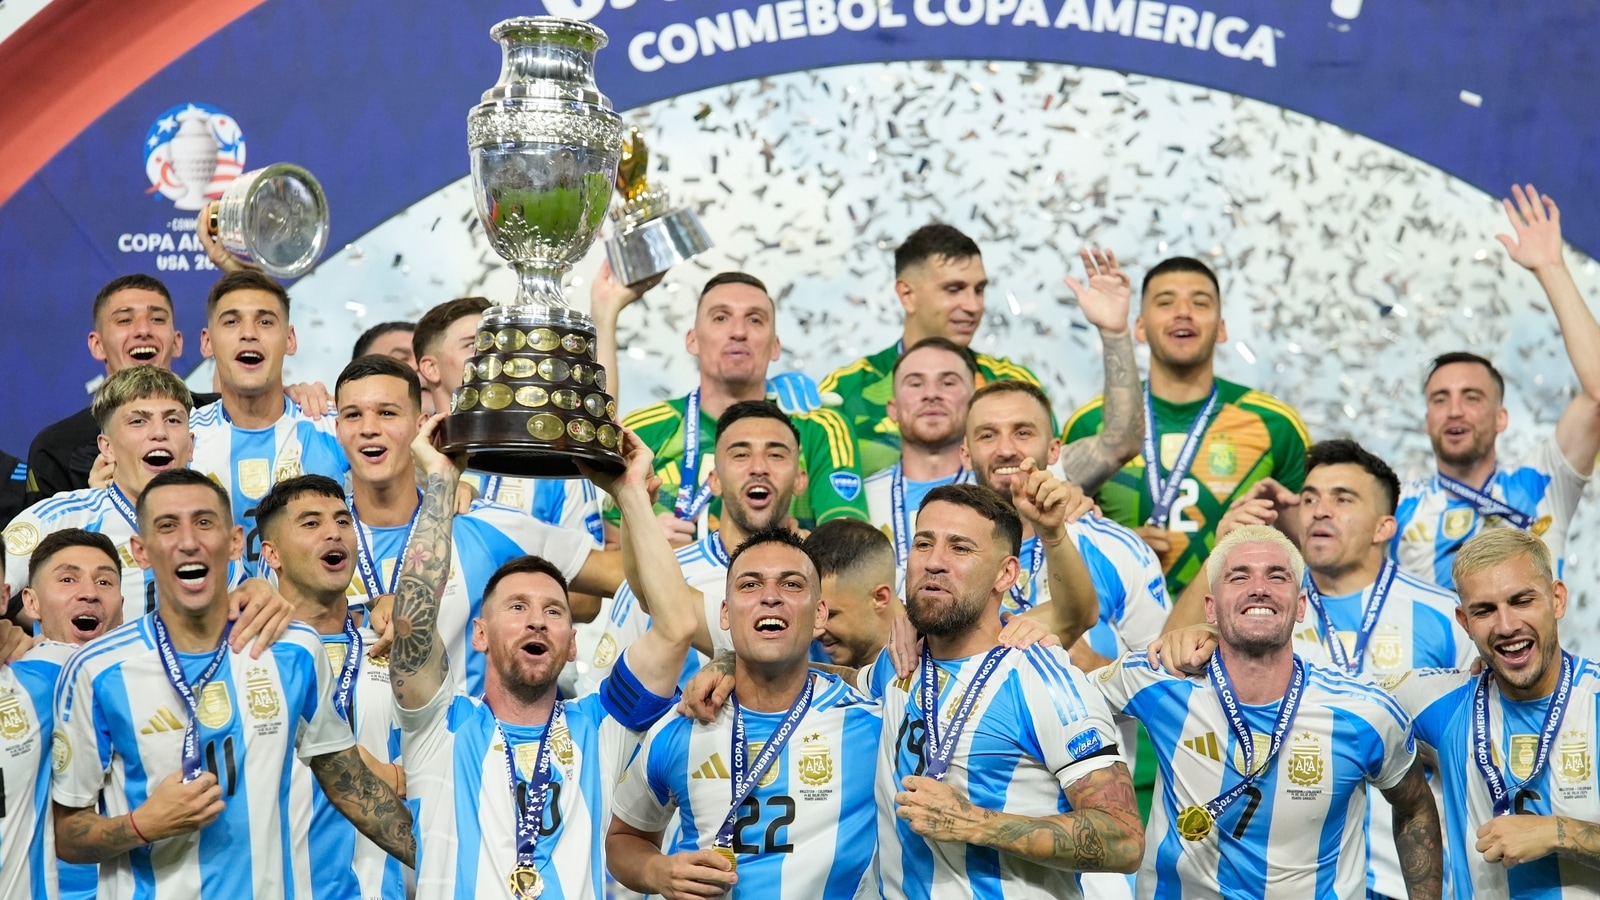 Lautaro Martinez’s last-minute strike gives Argentina their 16th Copa America title and a 1-0 extra-time win over Colombia | Football News